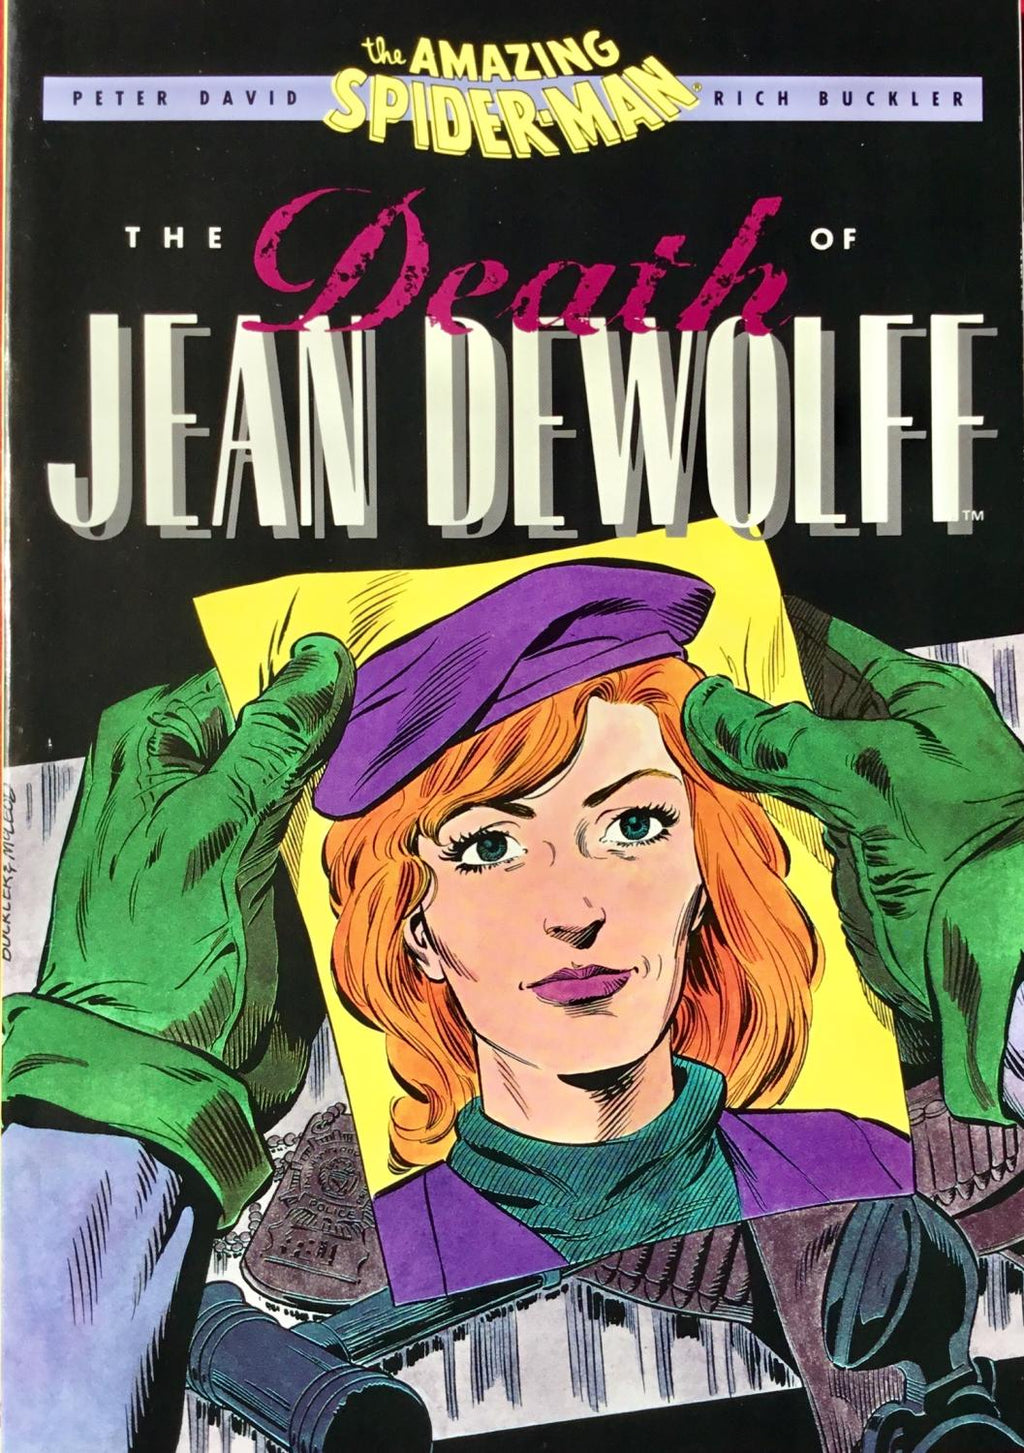 The Amazing Spider-Man : The Death Of Jean Dewolff - The Comic Warehouse